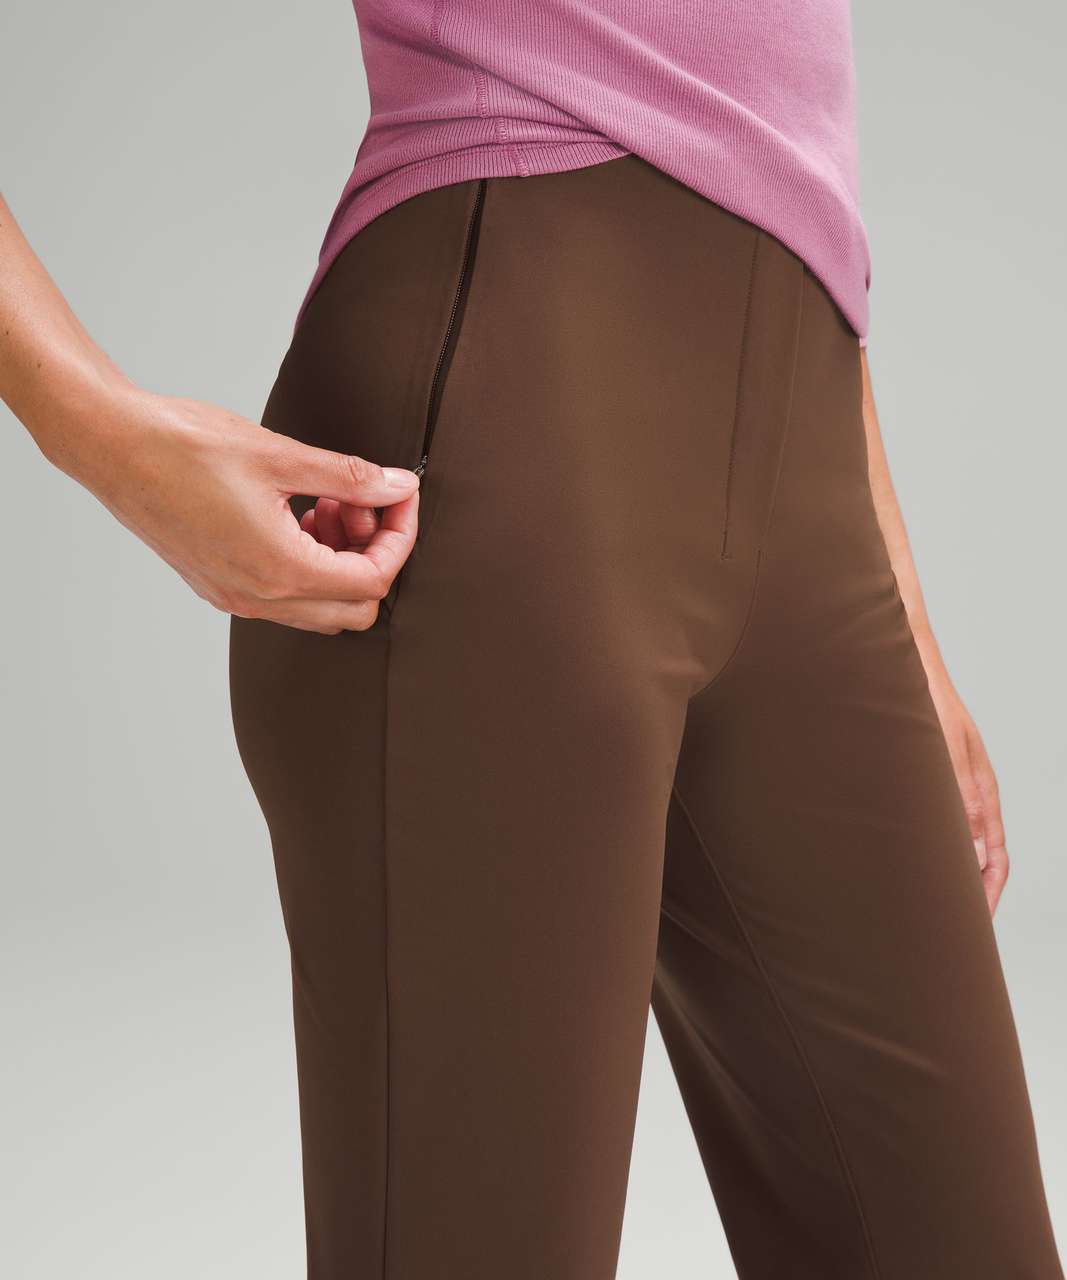 Lululemon Smooth Fit Pull-On High-Rise Cropped Pants - Java